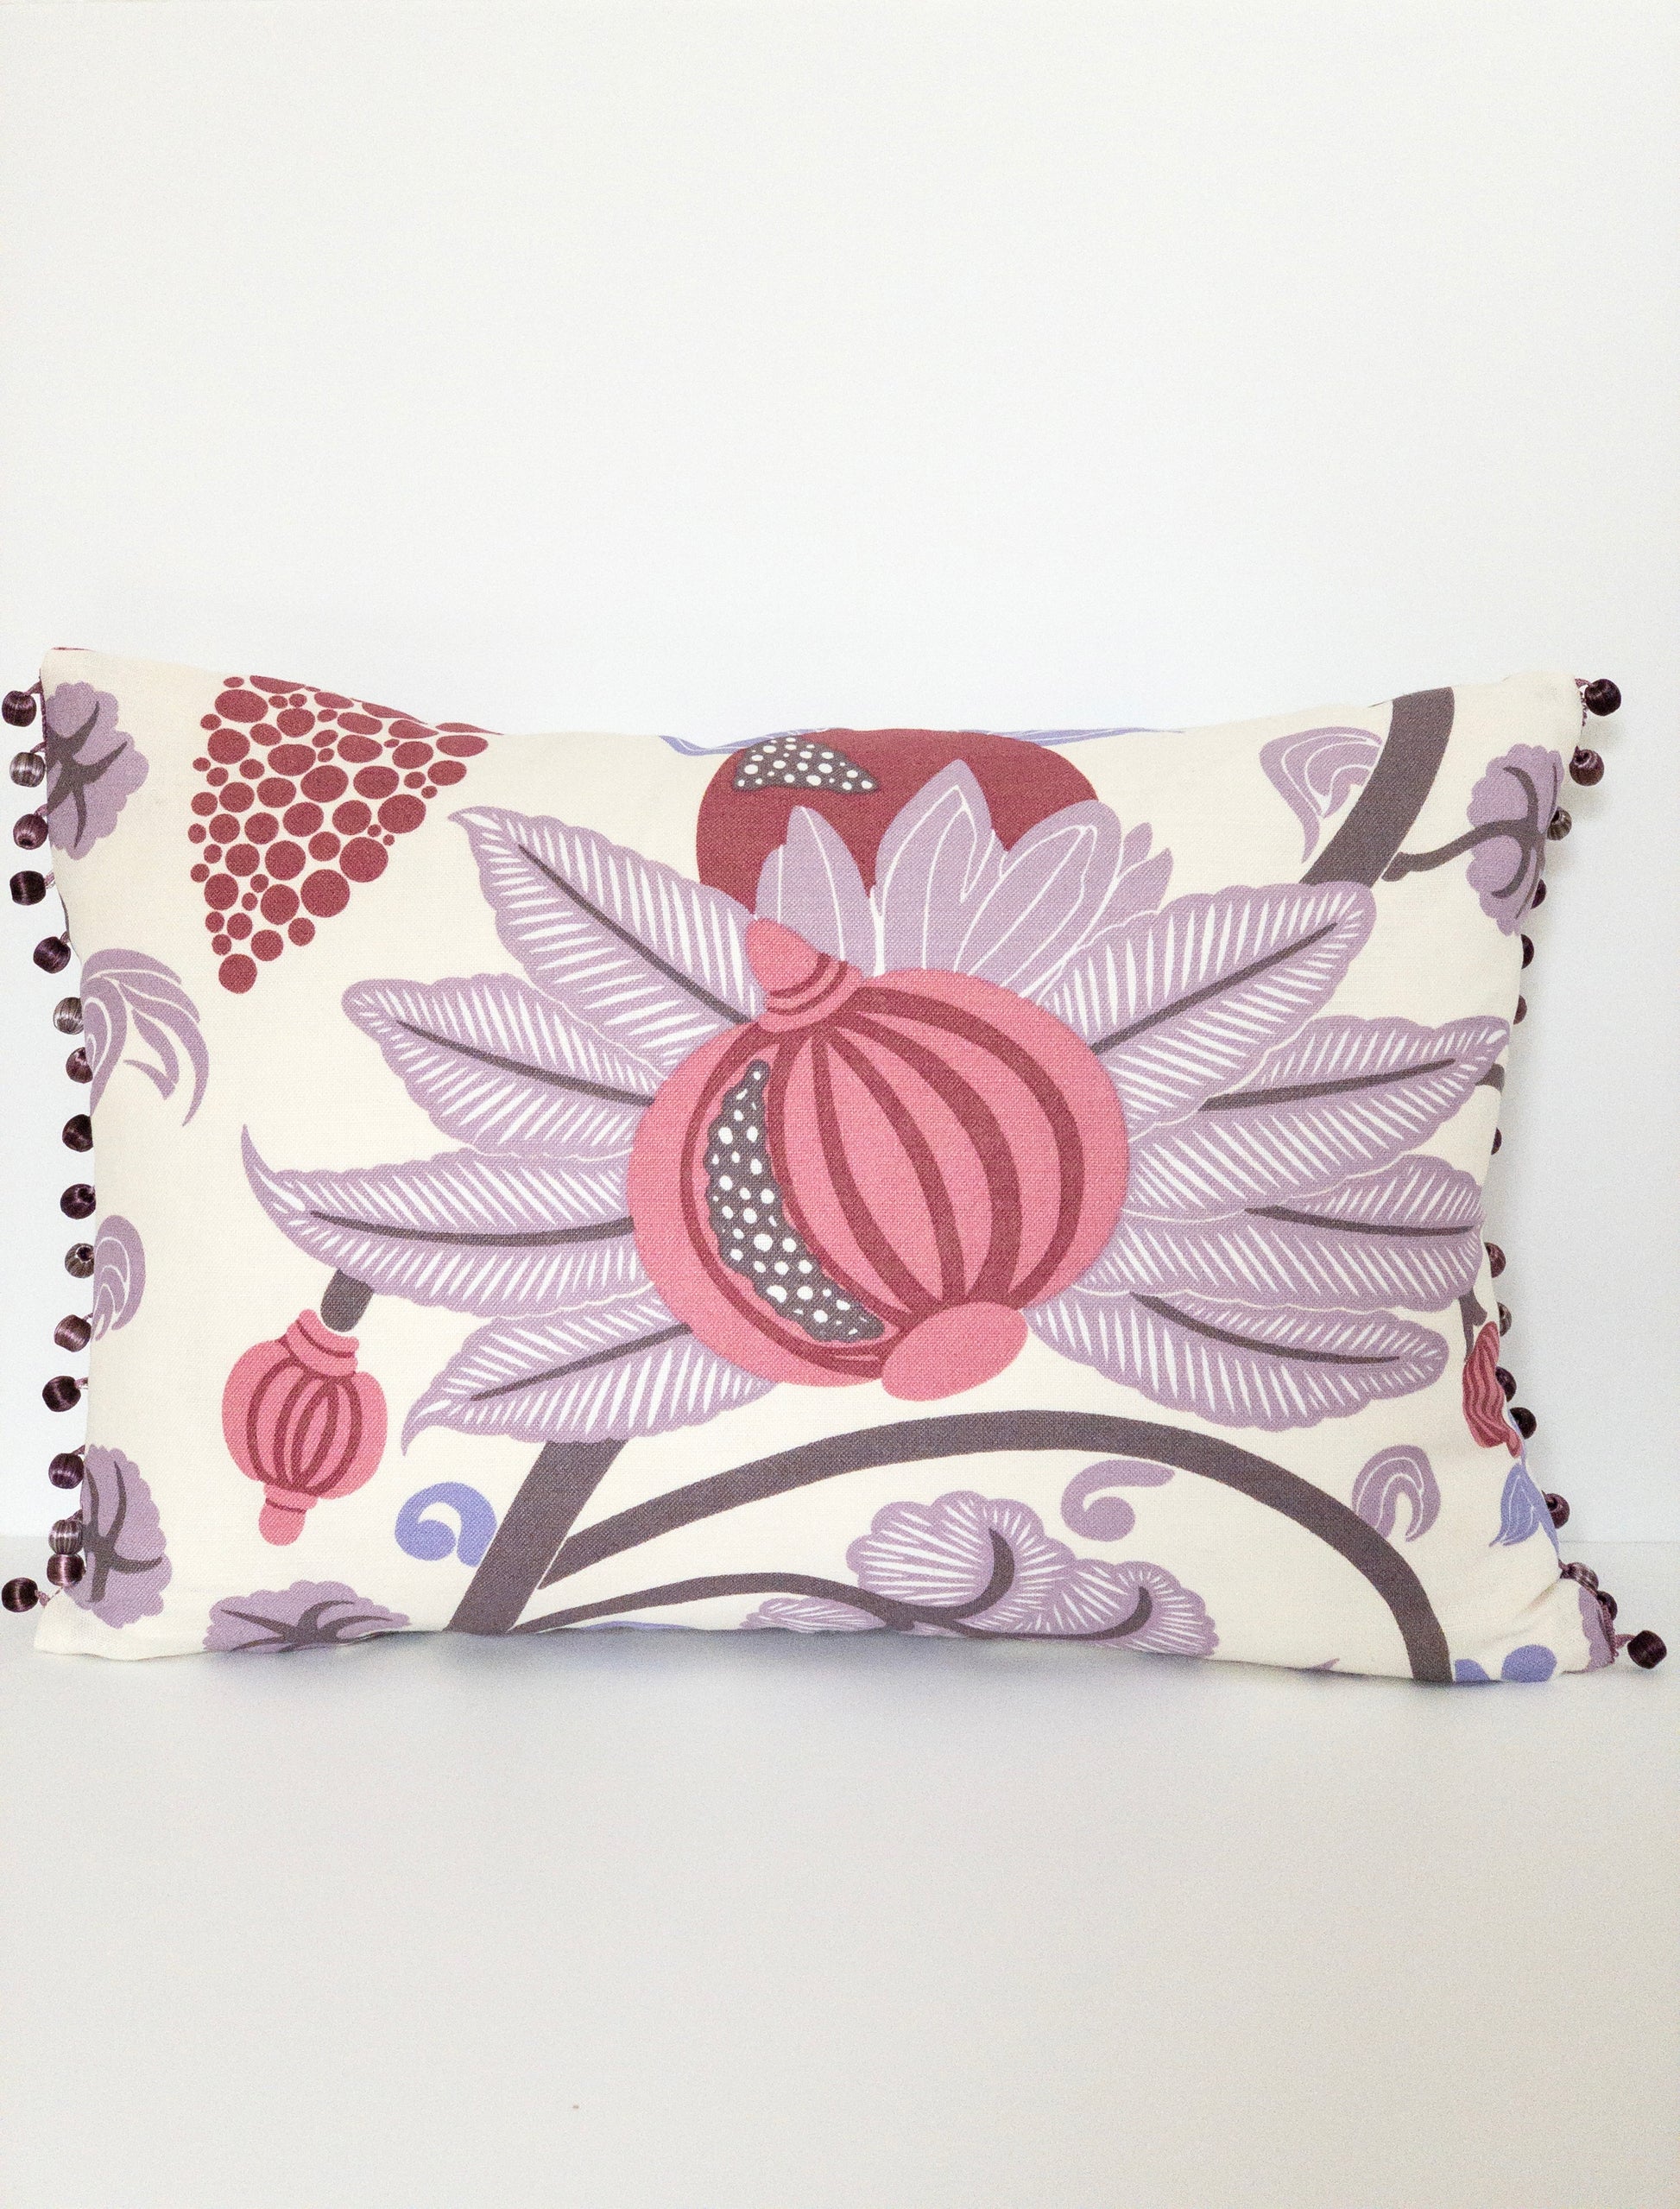 Colorful raspberry and purple floral motif pillow with purple beaded trim